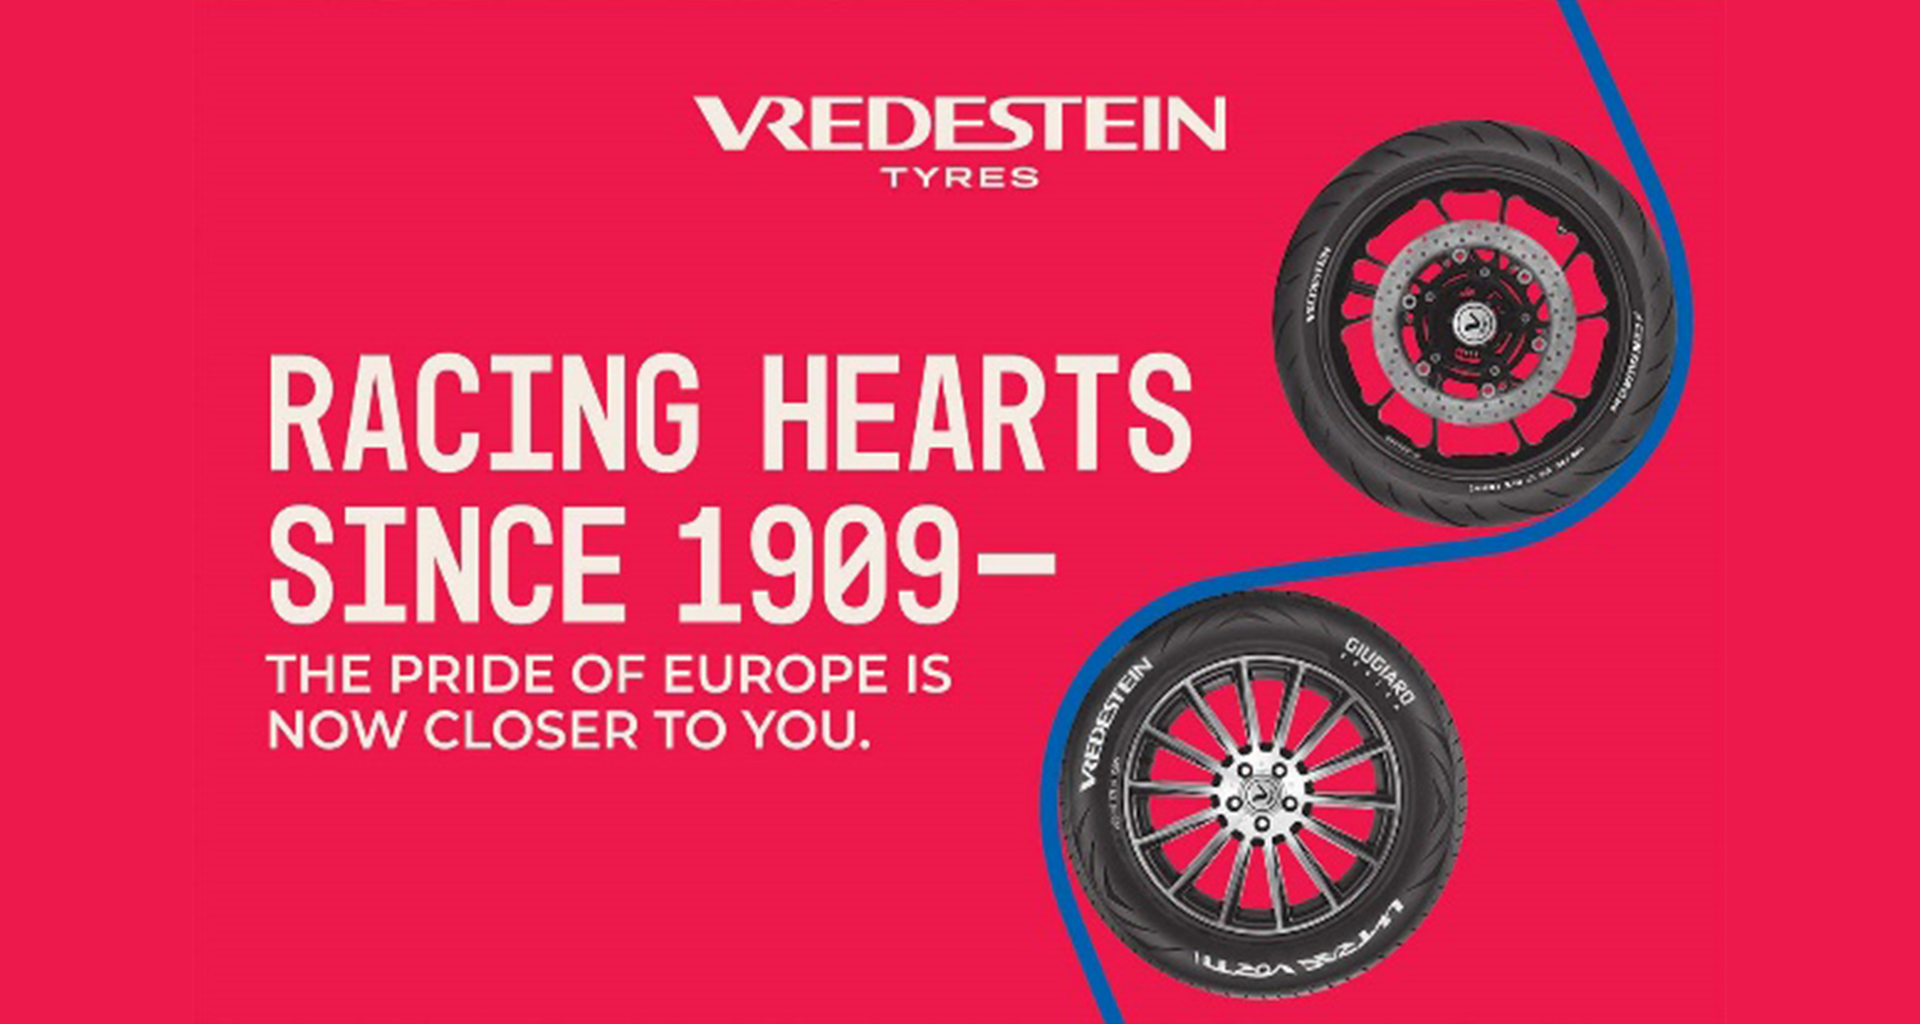 Apollo Tyres’ new campaign for Vredestein to get your Heart Racing!